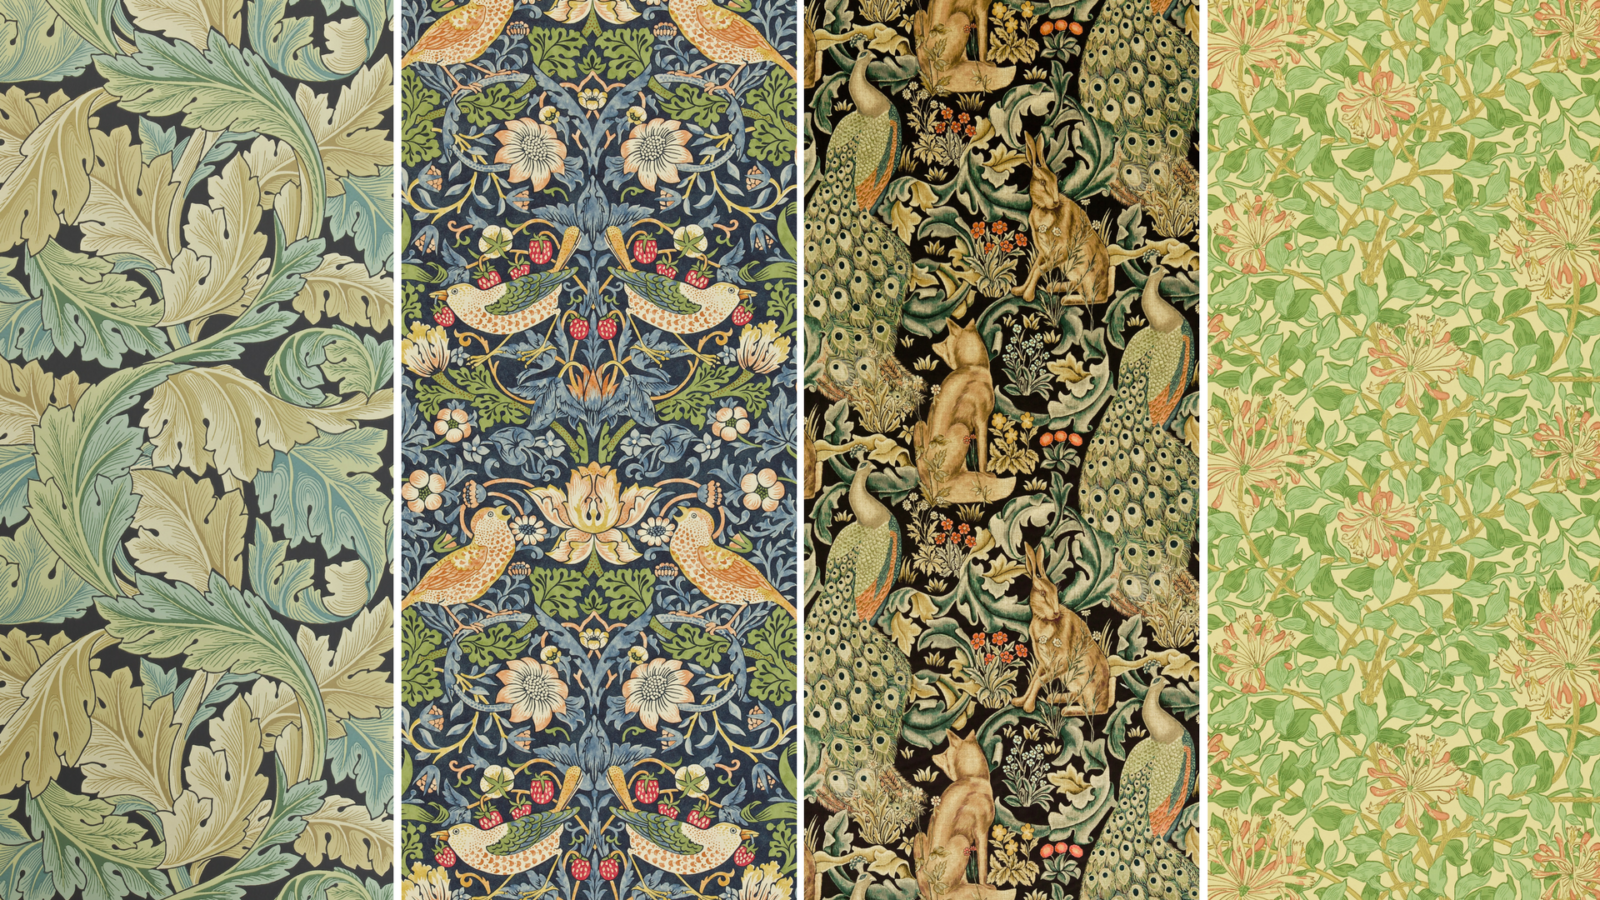 The Timeless Prints of William Morris & the Arts and Crafts Movement